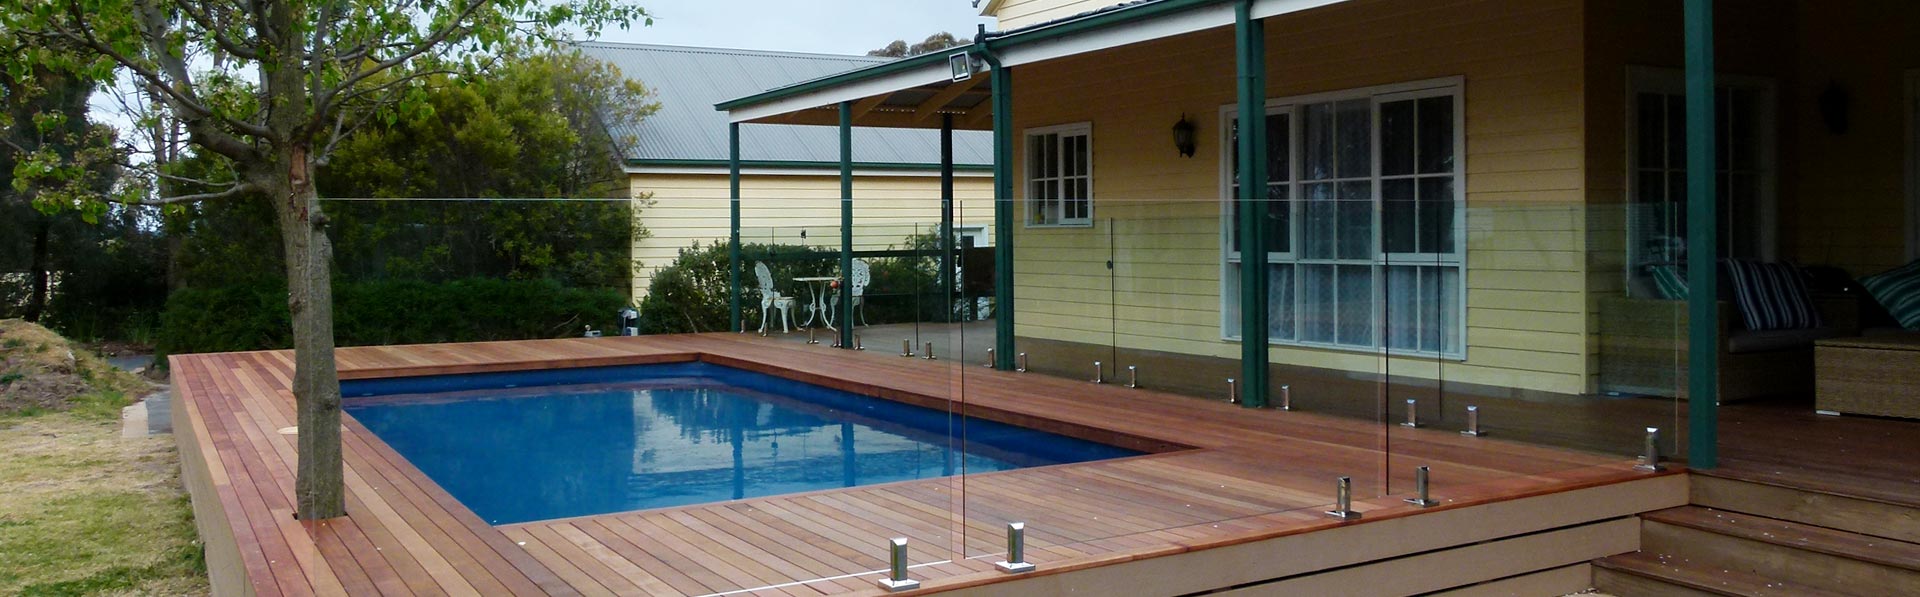 Above Ground Pools Semi Inground Pools Inground Pools Rectangle And Oval Shapes